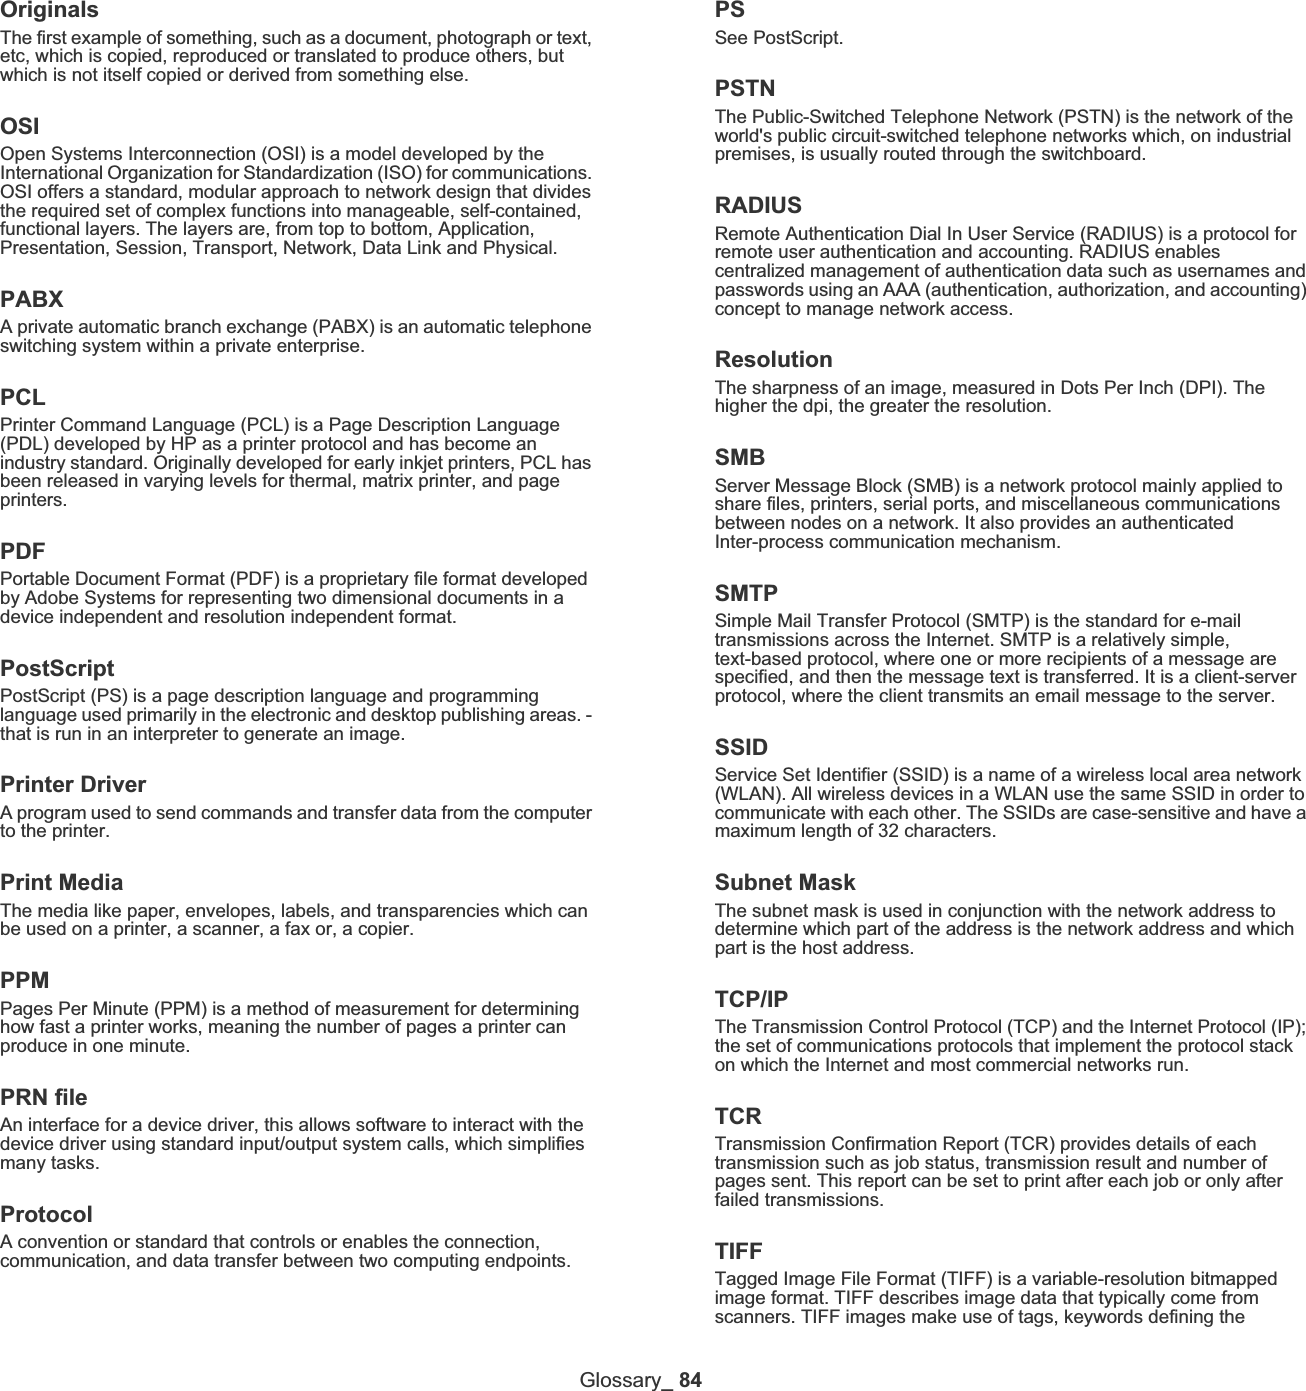 Glossary_ 84OriginalsThe first example of something, such as a document, photograph or text, etc, which is copied, reproduced or translated to produce others, but which is not itself copied or derived from something else.OSIOpen Systems Interconnection (OSI) is a model developed by the International Organization for Standardization (ISO) for communications. OSI offers a standard, modular approach to network design that divides the required set of complex functions into manageable, self-contained, functional layers. The layers are, from top to bottom, Application, Presentation, Session, Transport, Network, Data Link and Physical.PABXA private automatic branch exchange (PABX) is an automatic telephone switching system within a private enterprise.PCLPrinter Command Language (PCL) is a Page Description Language (PDL) developed by HP as a printer protocol and has become an industry standard. Originally developed for early inkjet printers, PCL has been released in varying levels for thermal, matrix printer, and page printers.PDFPortable Document Format (PDF) is a proprietary file format developed by Adobe Systems for representing two dimensional documents in a device independent and resolution independent format.PostScriptPostScript (PS) is a page description language and programming language used primarily in the electronic and desktop publishing areas. - that is run in an interpreter to generate an image.Printer DriverA program used to send commands and transfer data from the computer to the printer.Print MediaThe media like paper, envelopes, labels, and transparencies which can be used on a printer, a scanner, a fax or, a copier.PPMPages Per Minute (PPM) is a method of measurement for determining how fast a printer works, meaning the number of pages a printer can produce in one minute.PRN fileAn interface for a device driver, this allows software to interact with the device driver using standard input/output system calls, which simplifies many tasks. ProtocolA convention or standard that controls or enables the connection, communication, and data transfer between two computing endpoints.PSSee PostScript.PSTNThe Public-Switched Telephone Network (PSTN) is the network of the world&apos;s public circuit-switched telephone networks which, on industrial premises, is usually routed through the switchboard.RADIUSRemote Authentication Dial In User Service (RADIUS) is a protocol for remote user authentication and accounting. RADIUS enables centralized management of authentication data such as usernames and passwords using an AAA (authentication, authorization, and accounting) concept to manage network access.ResolutionThe sharpness of an image, measured in Dots Per Inch (DPI). The higher the dpi, the greater the resolution.SMBServer Message Block (SMB) is a network protocol mainly applied to share files, printers, serial ports, and miscellaneous communications between nodes on a network. It also provides an authenticated Inter-process communication mechanism.SMTPSimple Mail Transfer Protocol (SMTP) is the standard for e-mail transmissions across the Internet. SMTP is a relatively simple, text-based protocol, where one or more recipients of a message are specified, and then the message text is transferred. It is a client-server protocol, where the client transmits an email message to the server.SSIDService Set Identifier (SSID) is a name of a wireless local area network (WLAN). All wireless devices in a WLAN use the same SSID in order to communicate with each other. The SSIDs are case-sensitive and have a maximum length of 32 characters.Subnet Mask The subnet mask is used in conjunction with the network address to determine which part of the address is the network address and which part is the host address.TCP/IPThe Transmission Control Protocol (TCP) and the Internet Protocol (IP); the set of communications protocols that implement the protocol stack on which the Internet and most commercial networks run.TCRTransmission Confirmation Report (TCR) provides details of each transmission such as job status, transmission result and number of pages sent. This report can be set to print after each job or only after failed transmissions.TIFFTagged Image File Format (TIFF) is a variable-resolution bitmapped image format. TIFF describes image data that typically come from scanners. TIFF images make use of tags, keywords defining the 